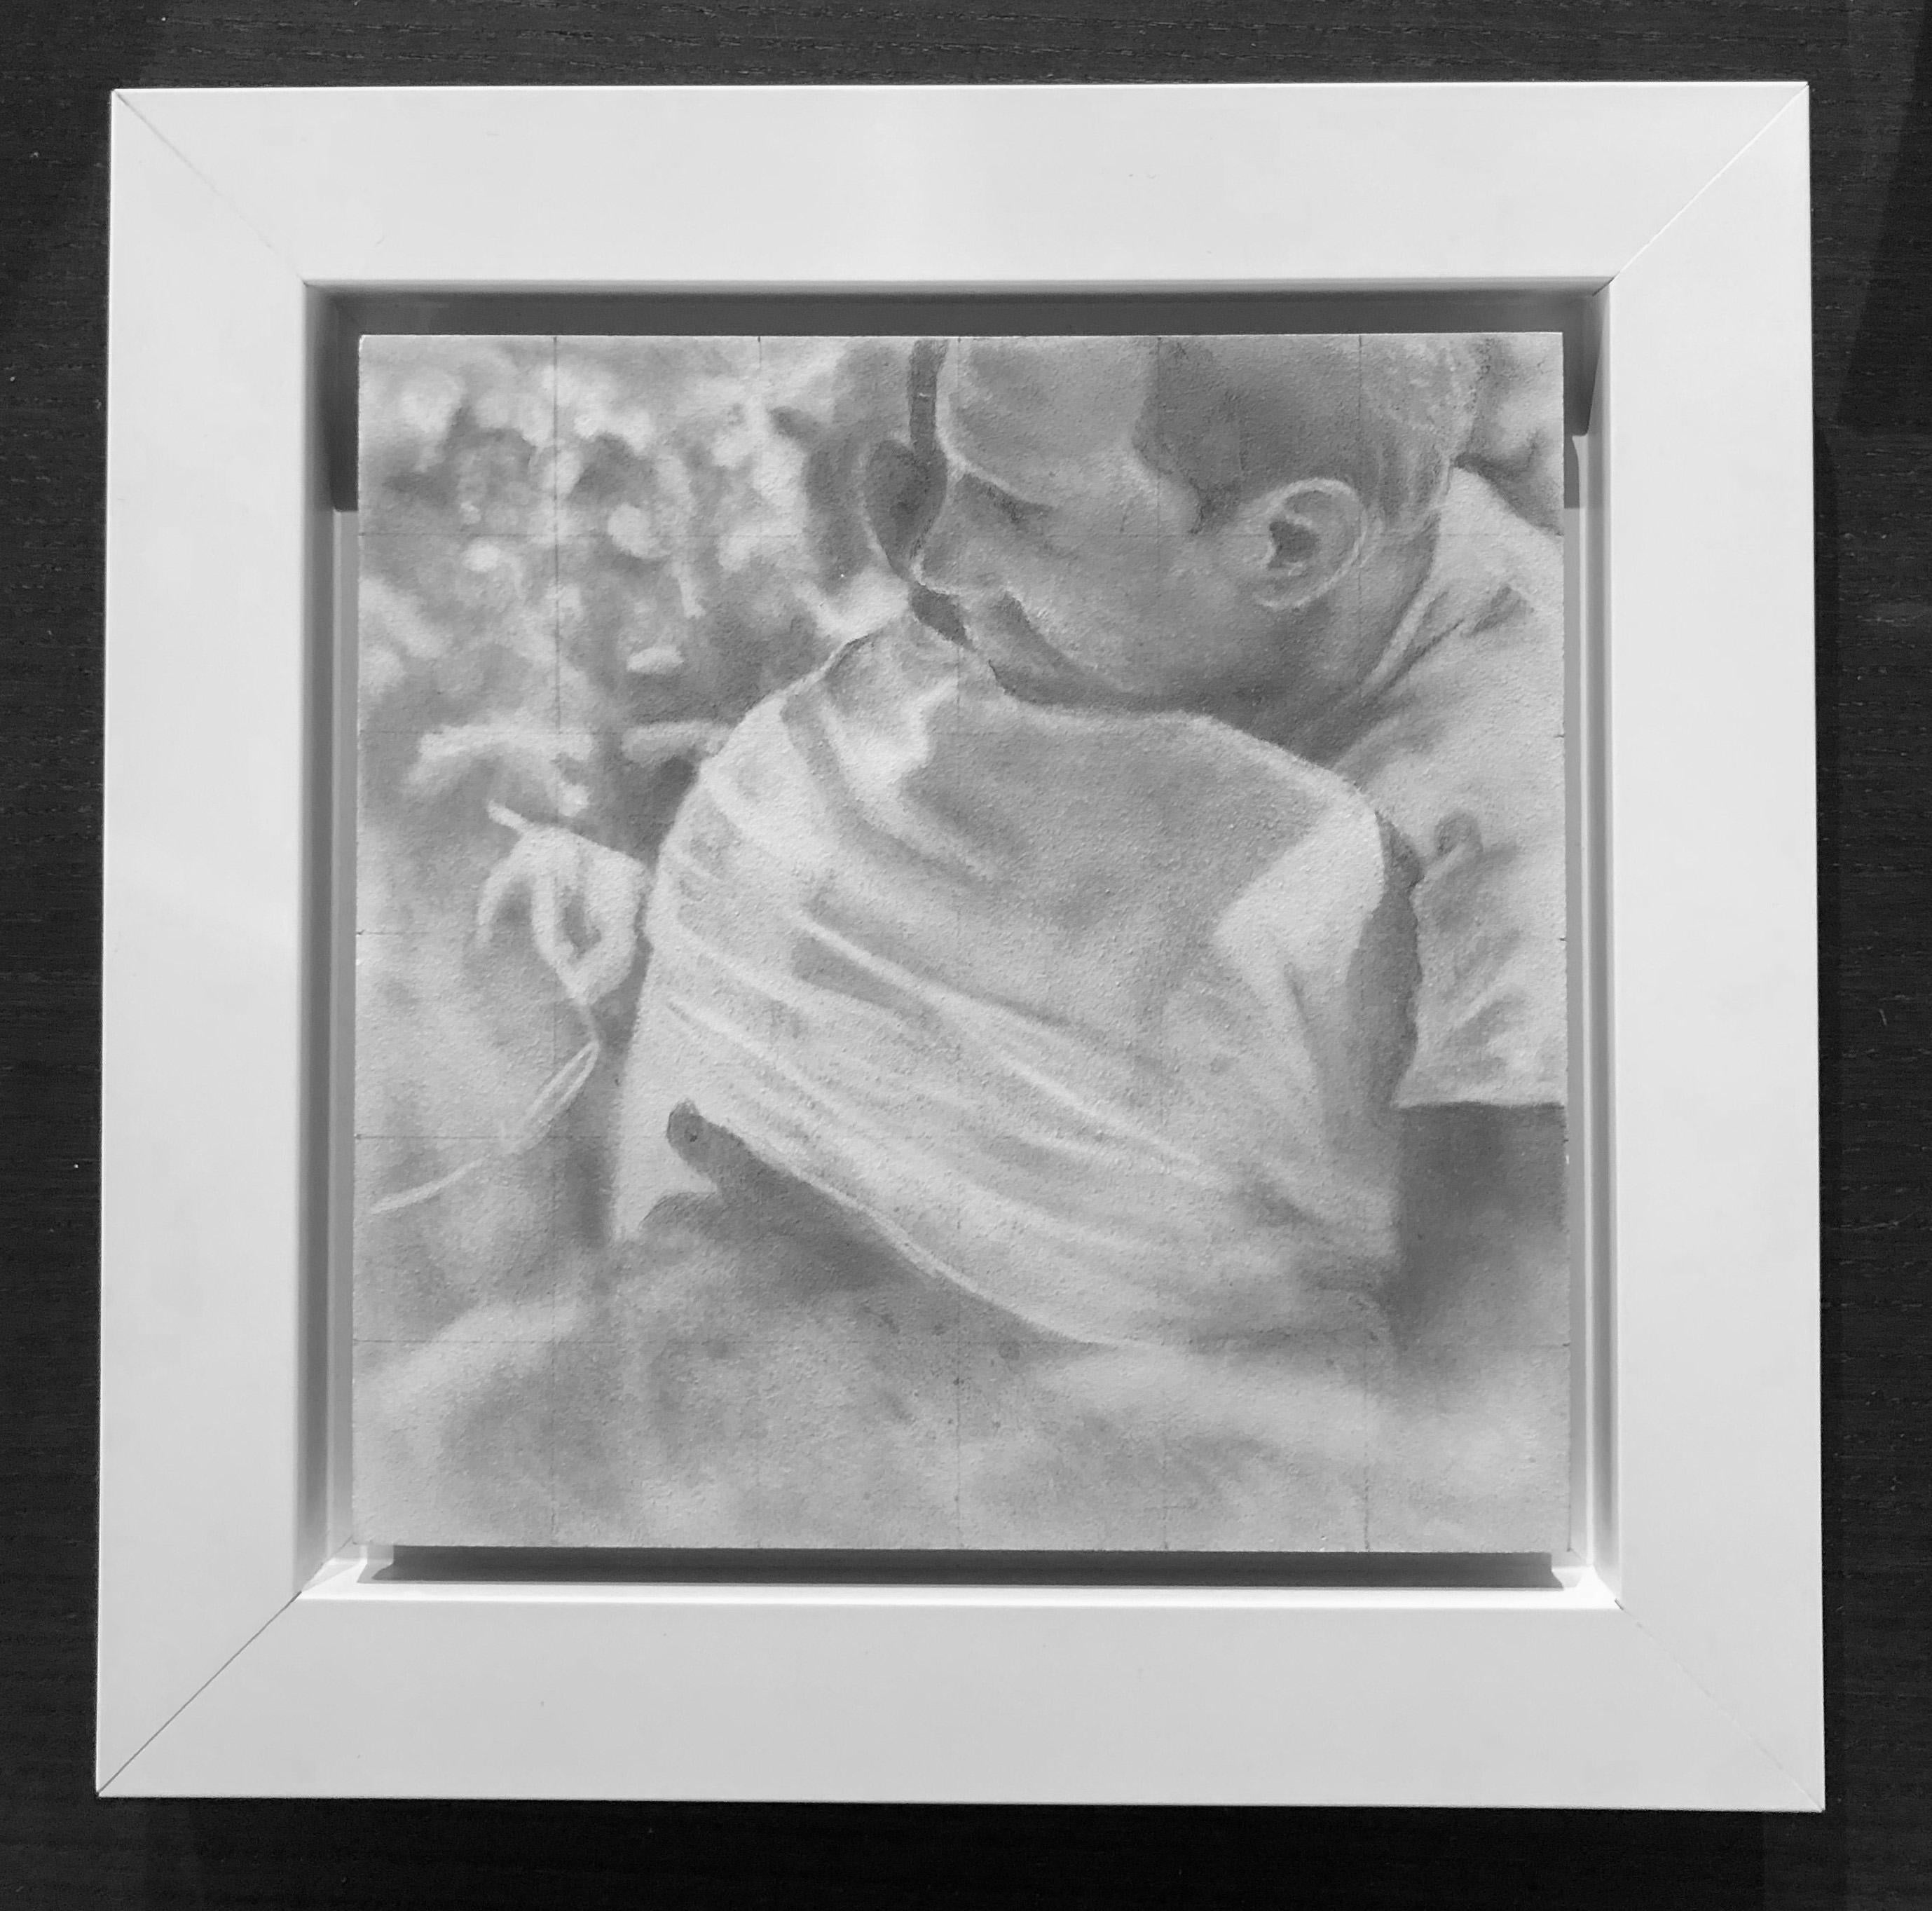 Untitled #2 - Two Male Figures Embracing, Small Scale Graphite on Panel Drawing - Art by Rick Sindt